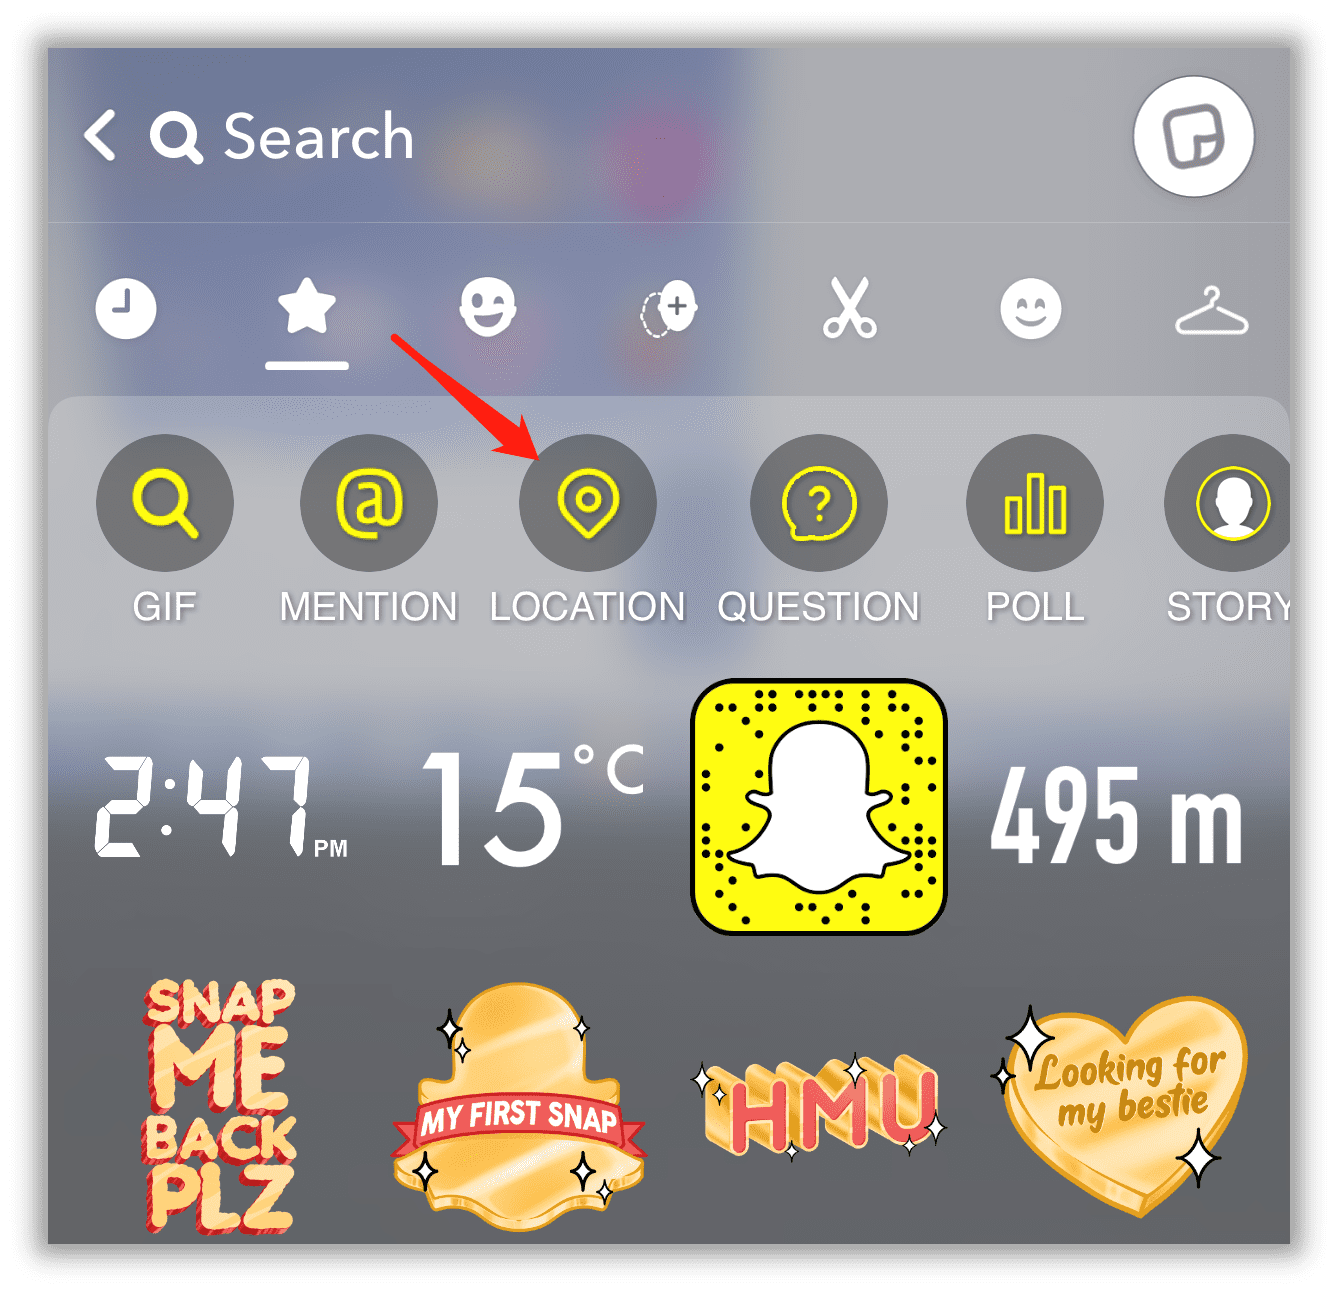 How to add locations on Snapchat